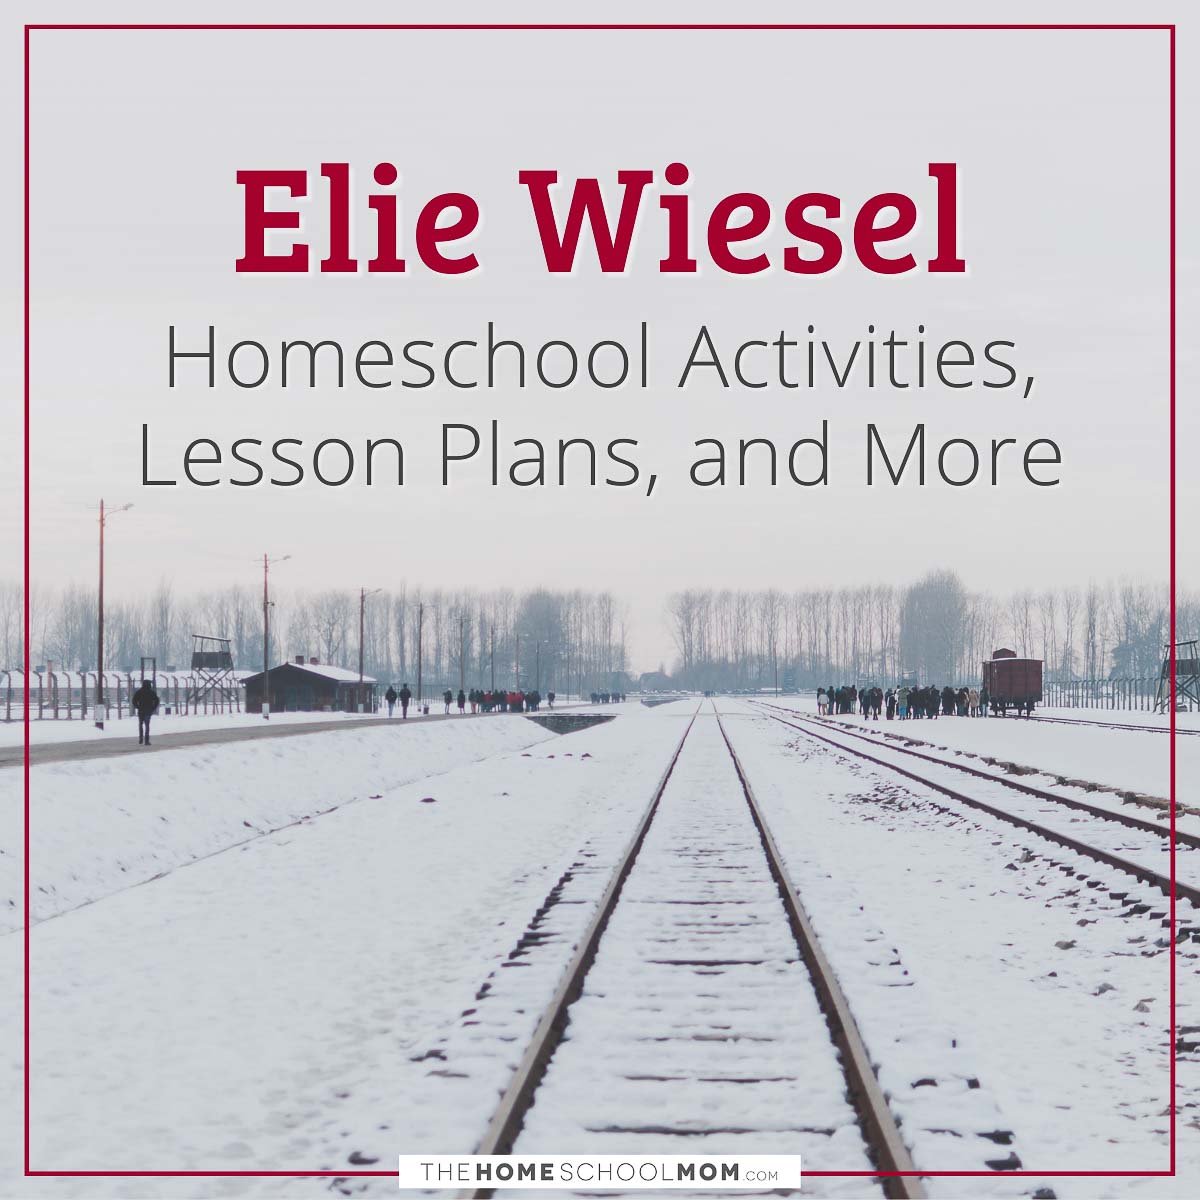 Elie Wiesel Homeschool Activities, Lesson Plans, and More.